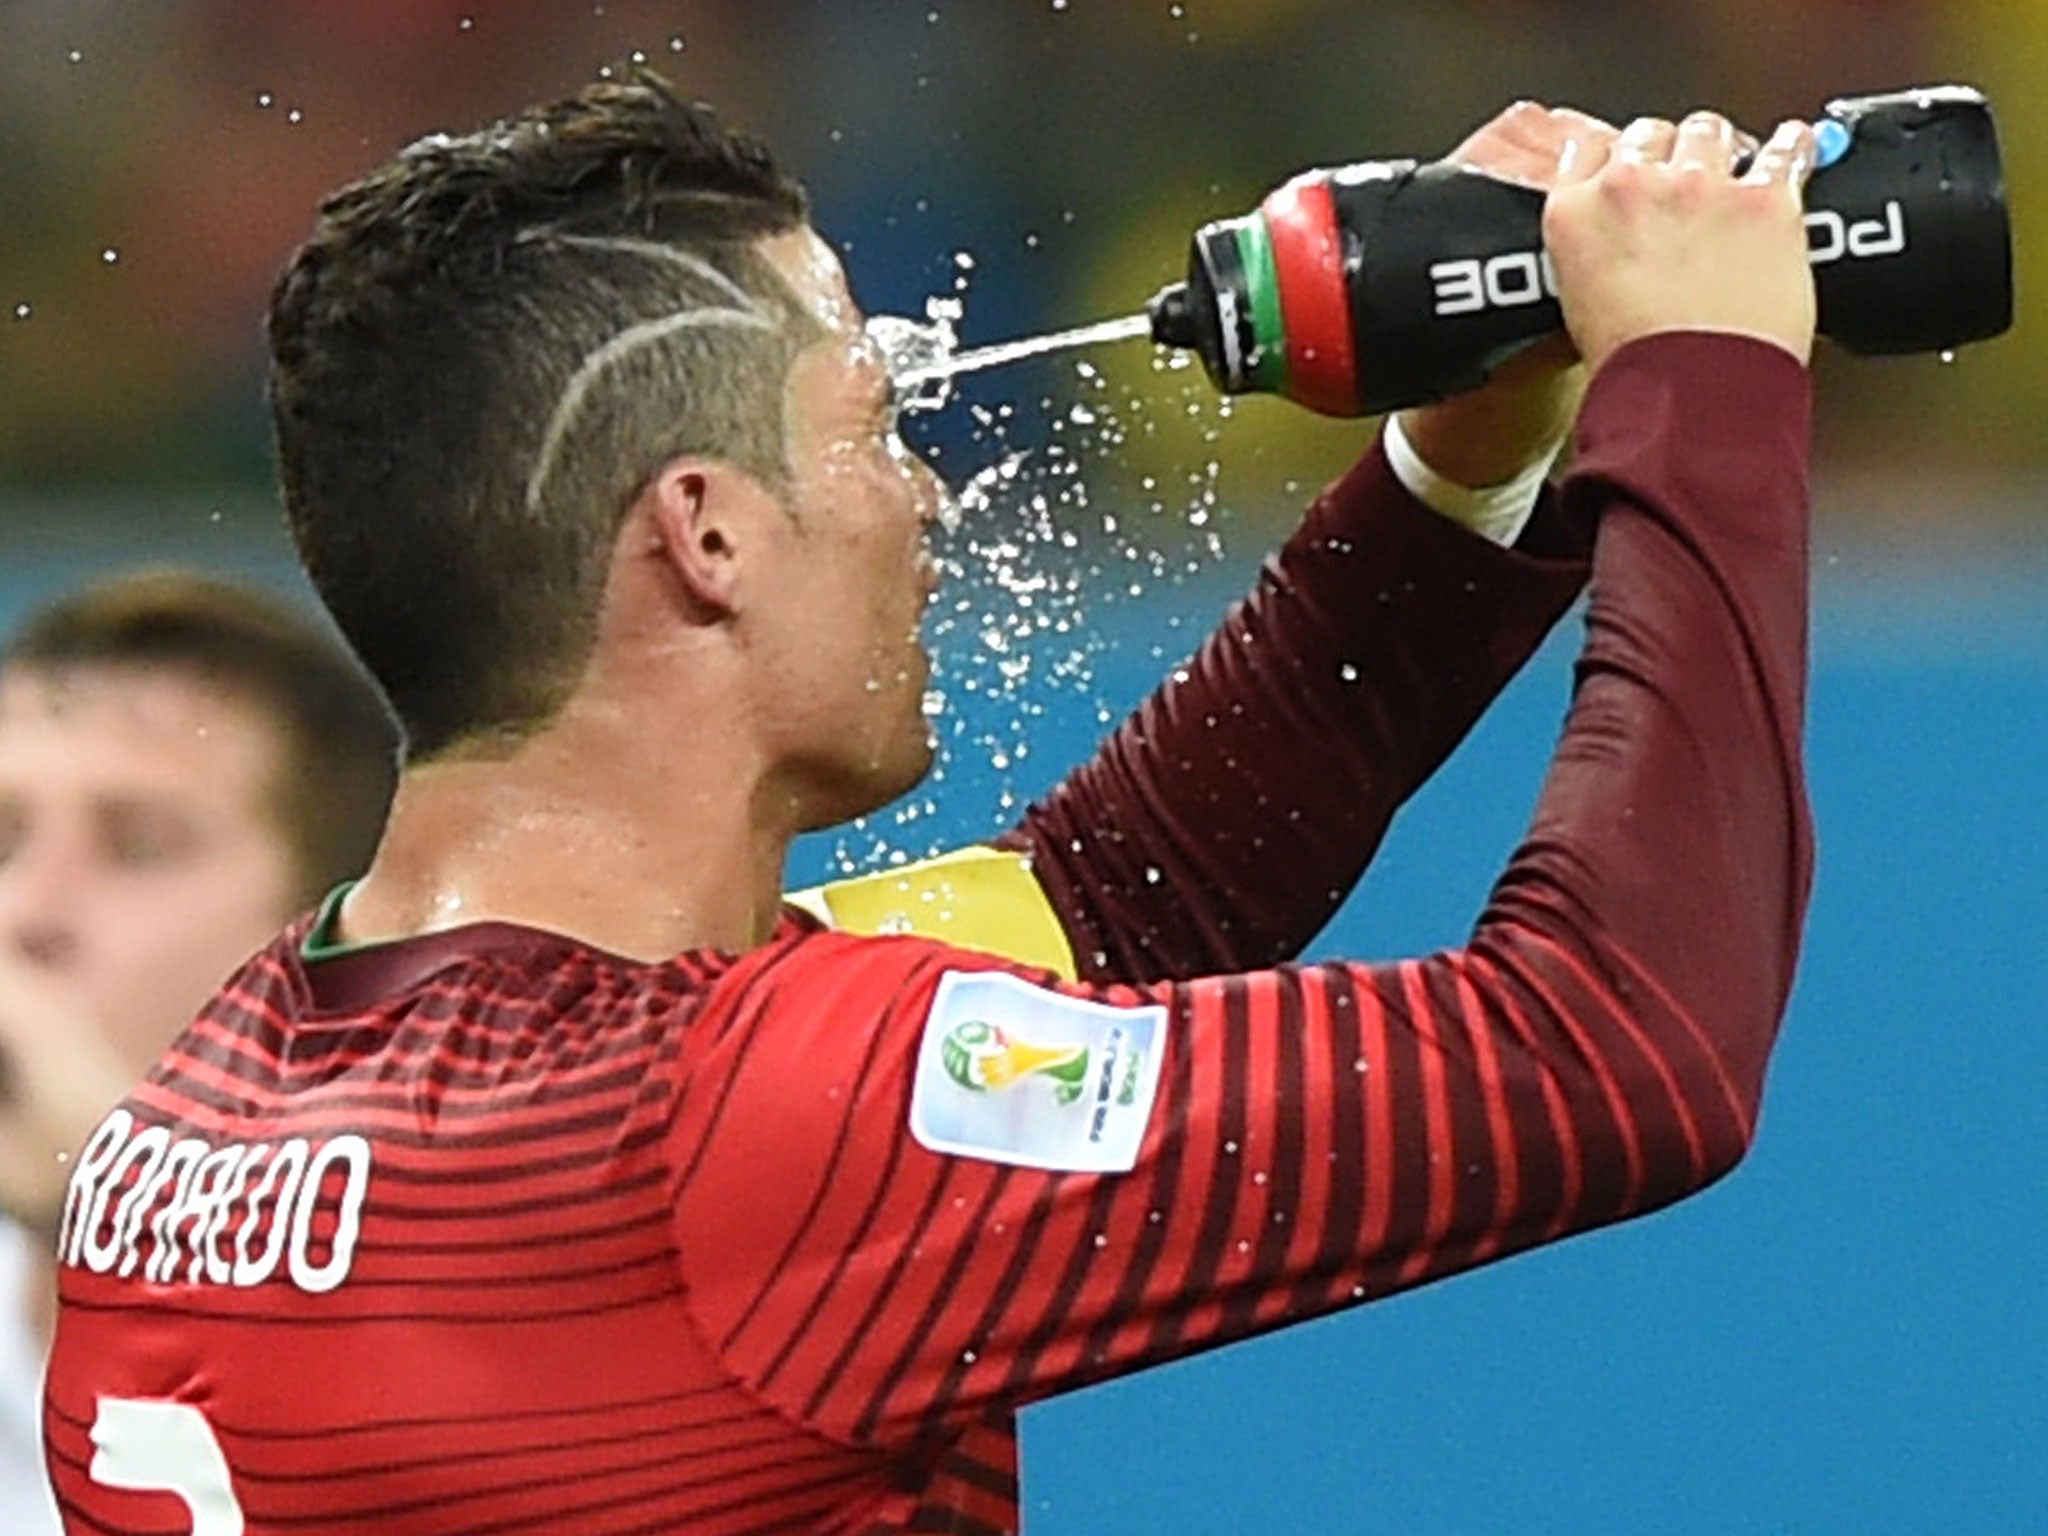 Cristiano Ronaldo takes some water on board in Manaus